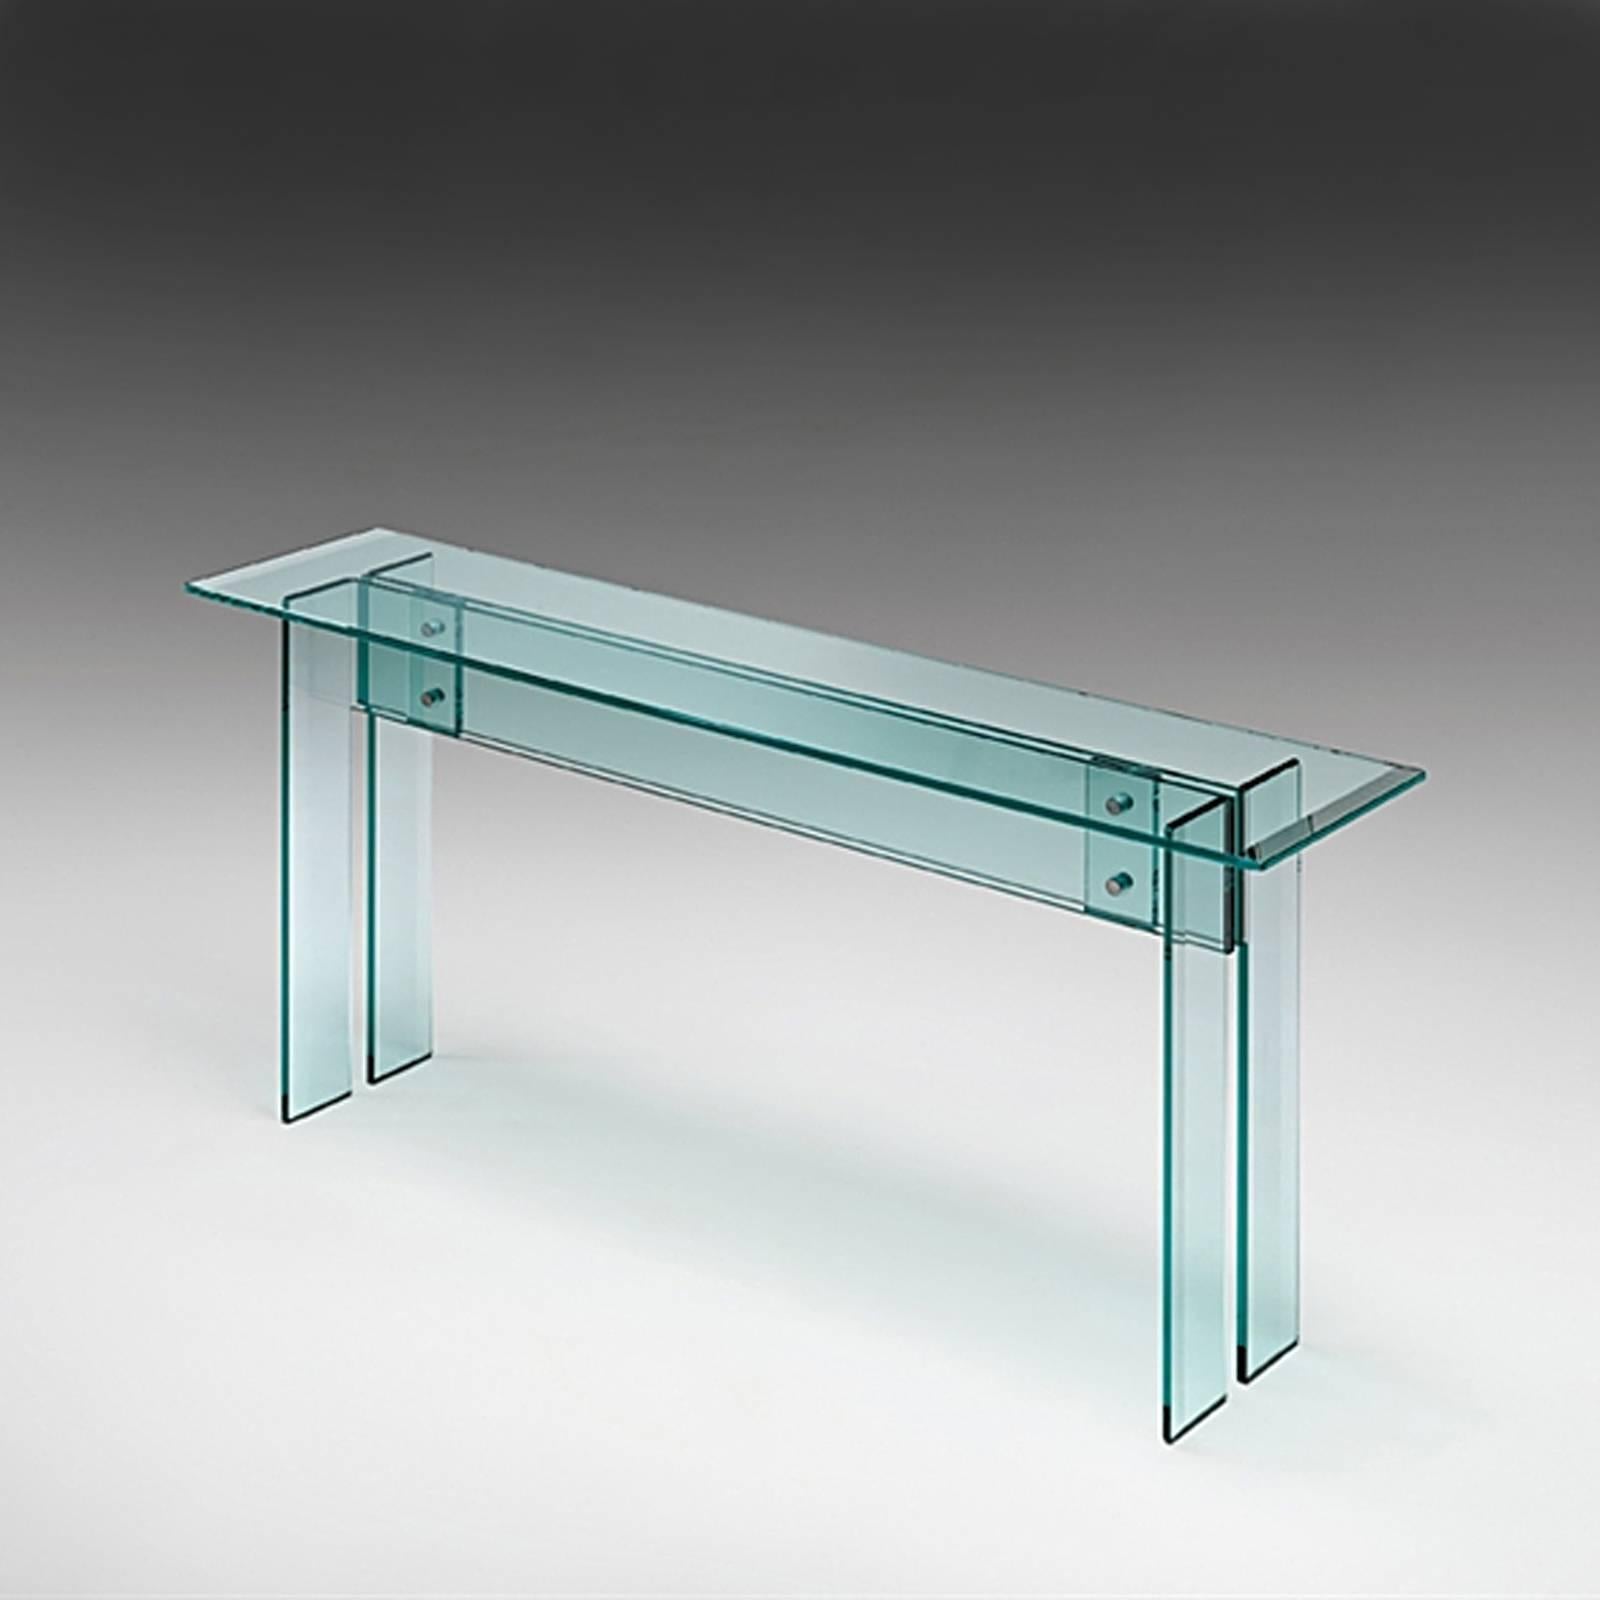 Console with transparent glass top with 15 mm thickness bevelled
about 2 short sides. Base in transparent glass welded 15mm thickness,
with bevelled edges. Steel fasteners ftainless.
Available in:
L180xD40xH85cm, price: € 4,950.00
L240xD40xH85cm,